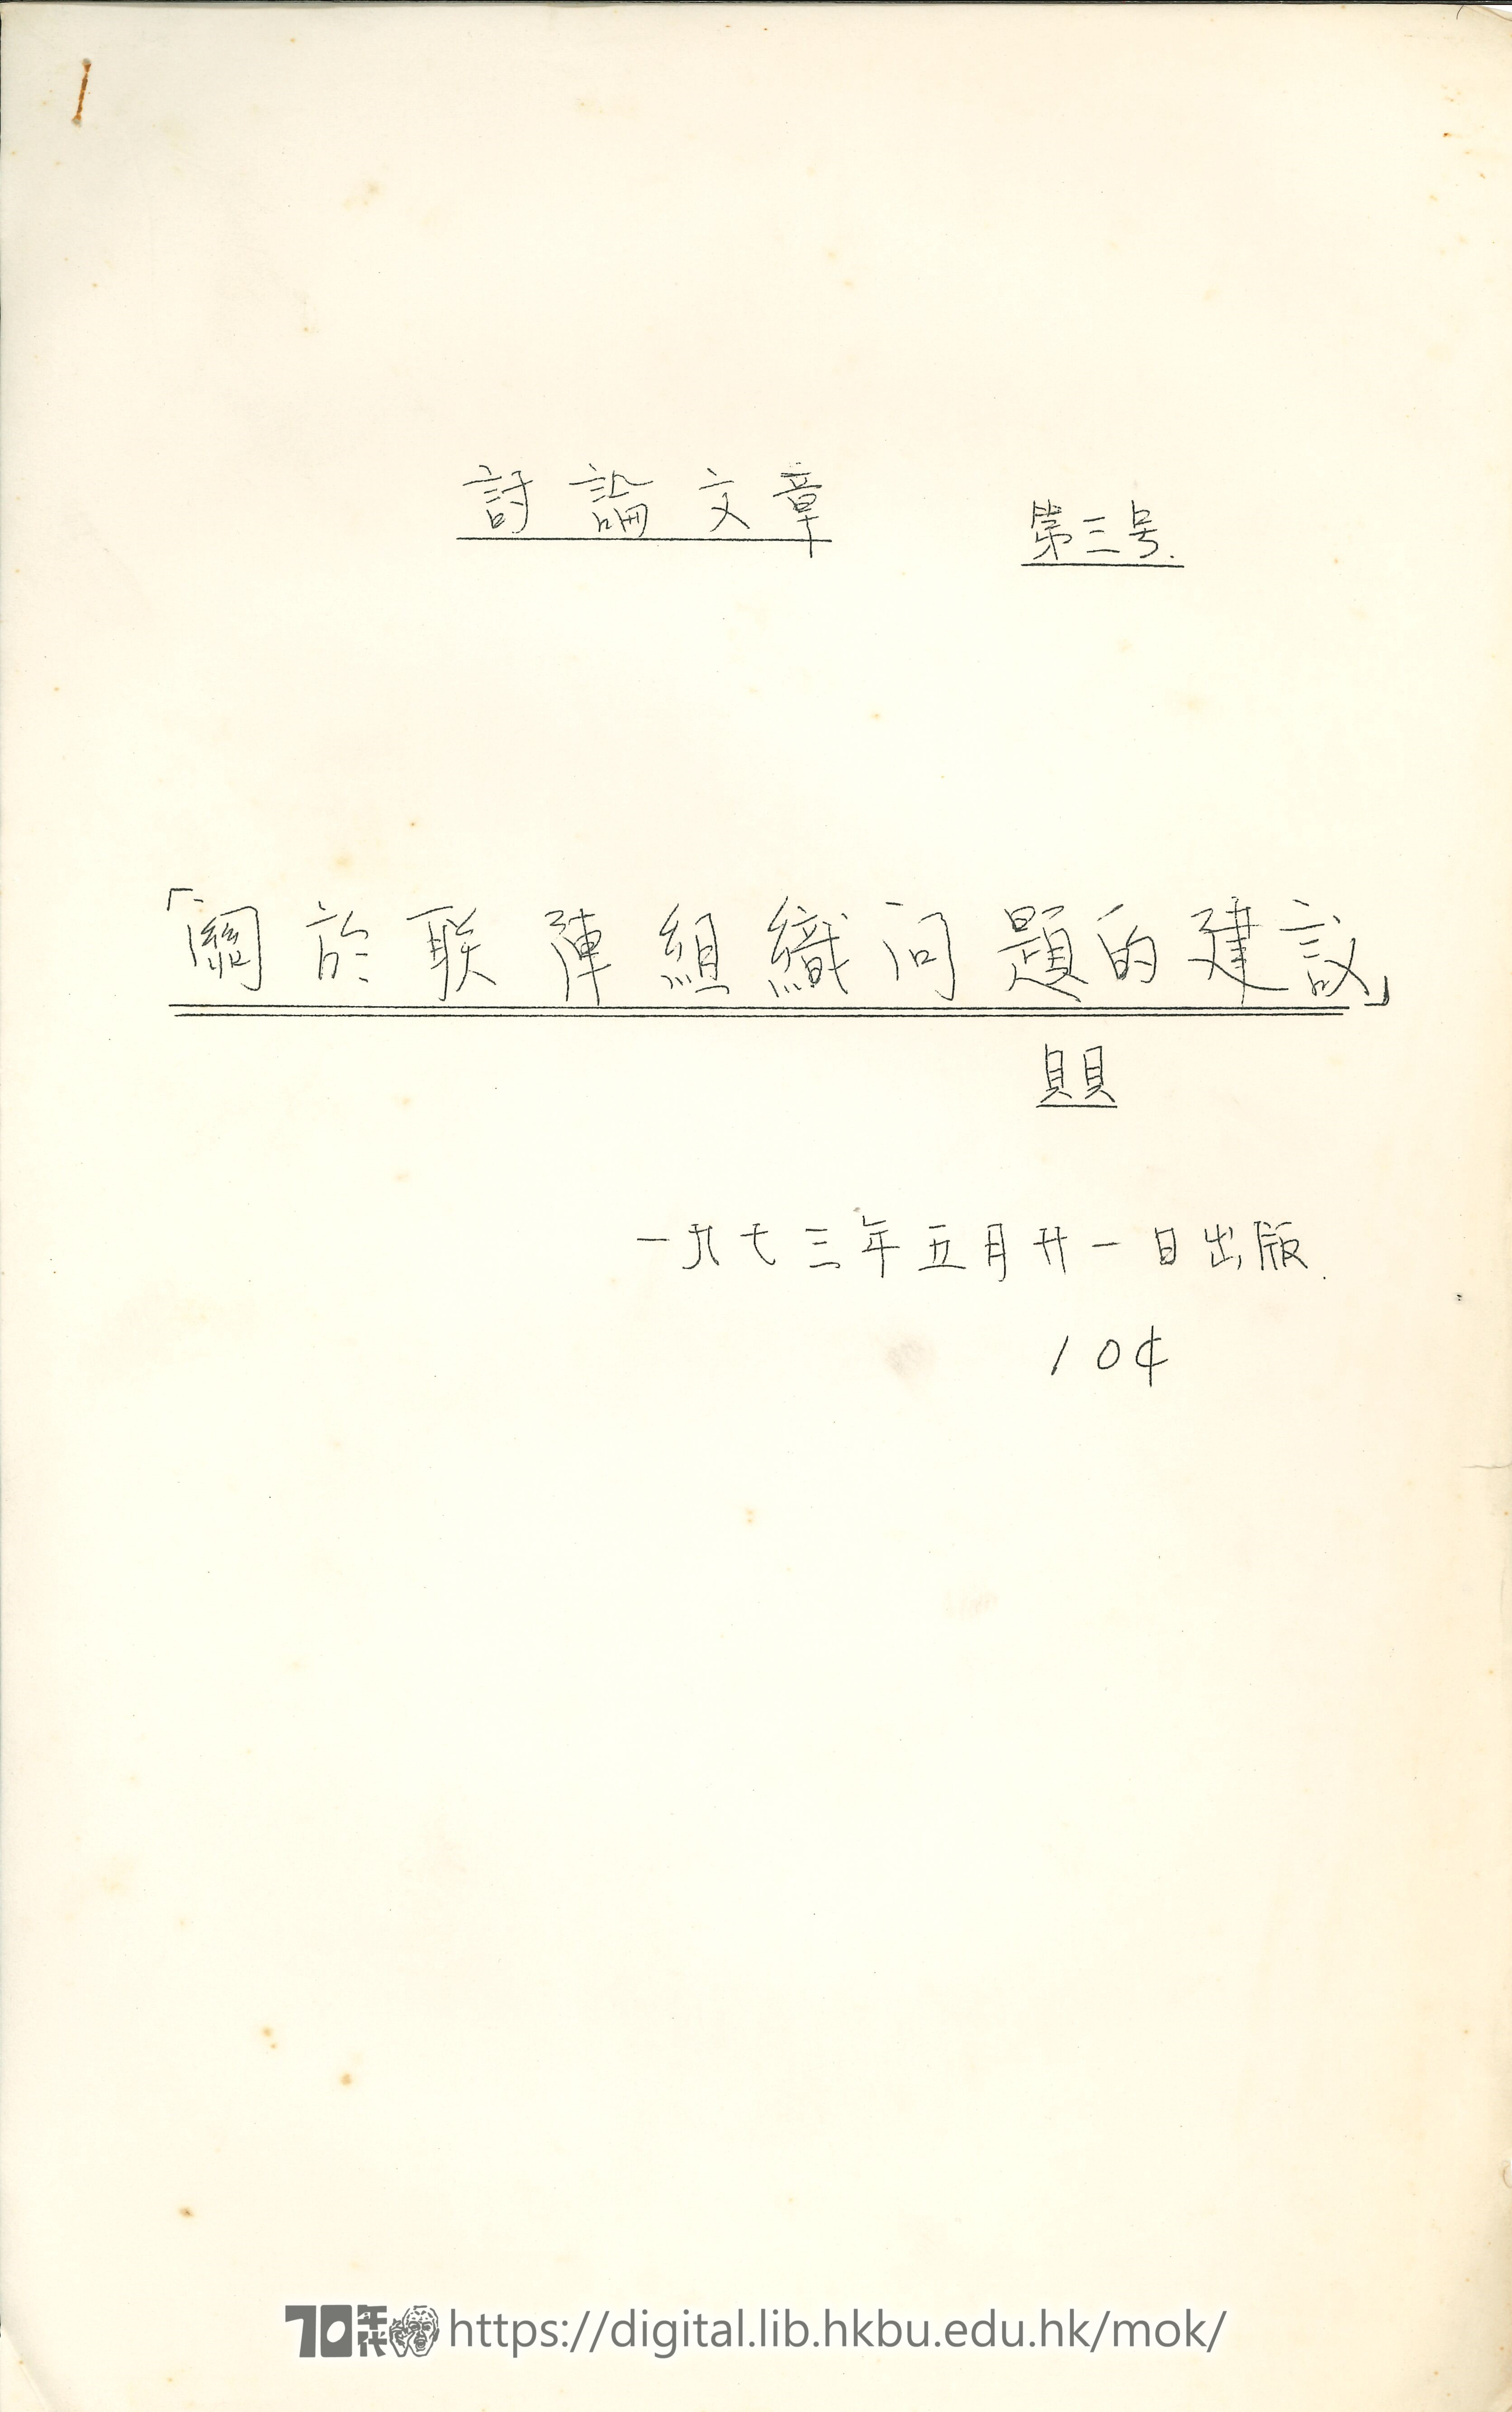   Article for discussion no.3 - Suggestions on organisation of United Front 貝貝 